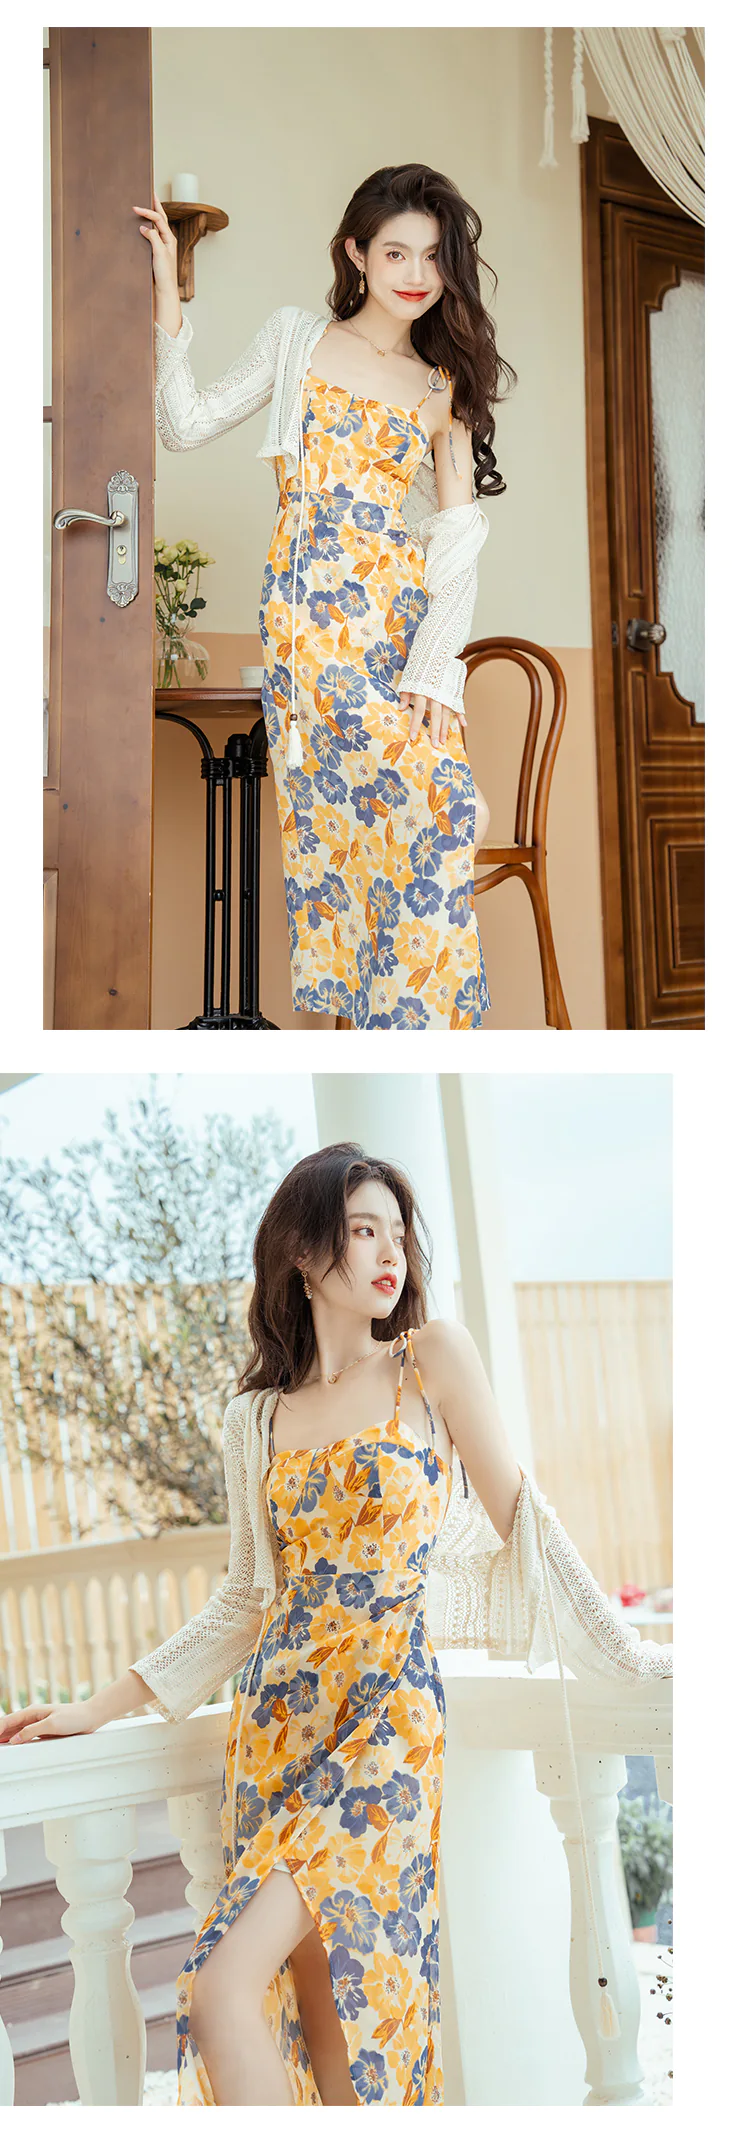 Sweet-Floral-Printed-Yellow-Summer-Beach-Slip-Dress-with-Knit-Cardigan16